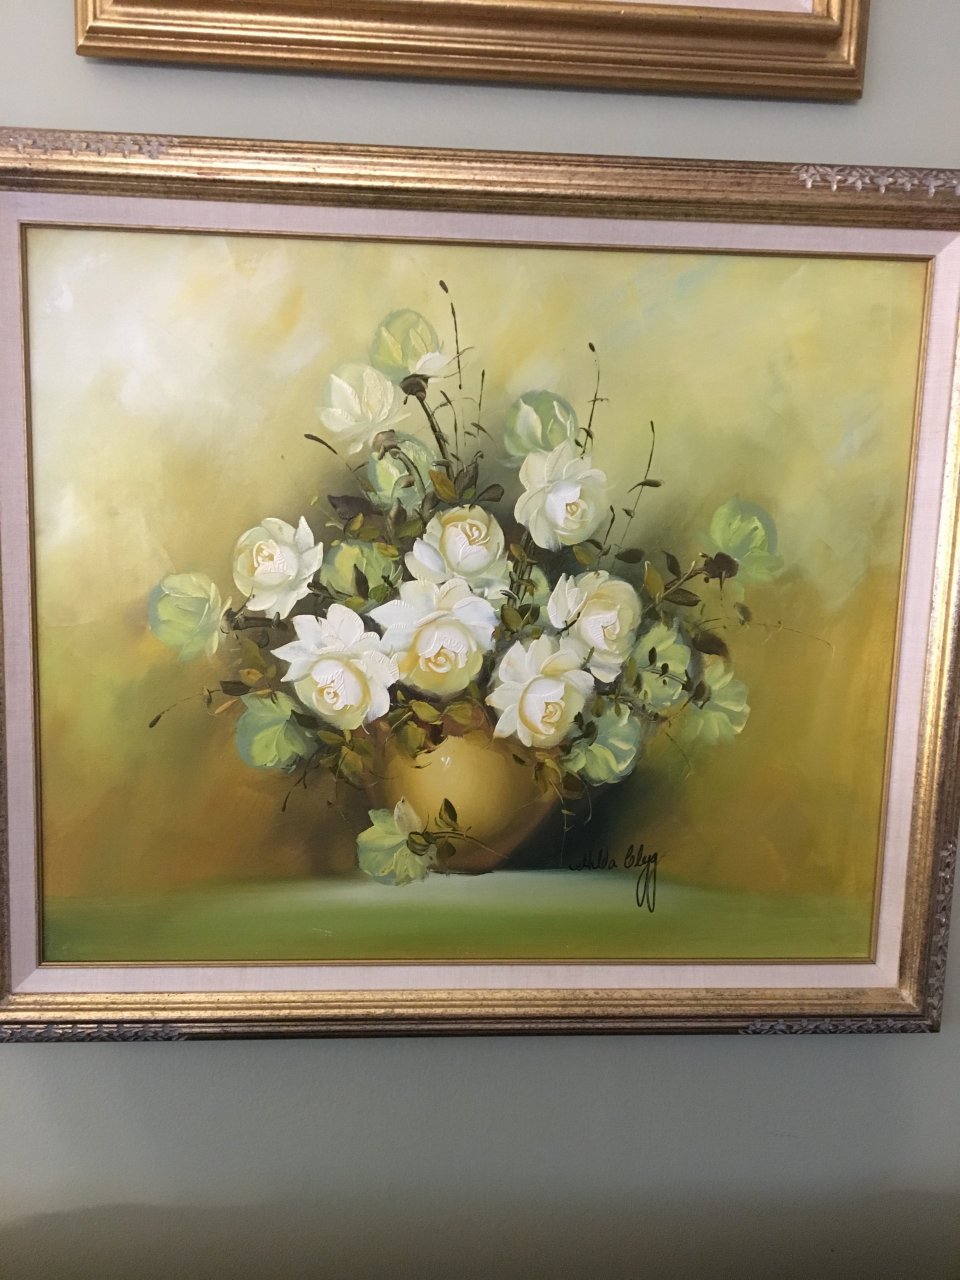 Authenticity And Value Of These Signed Paintings | Artifact Collectors